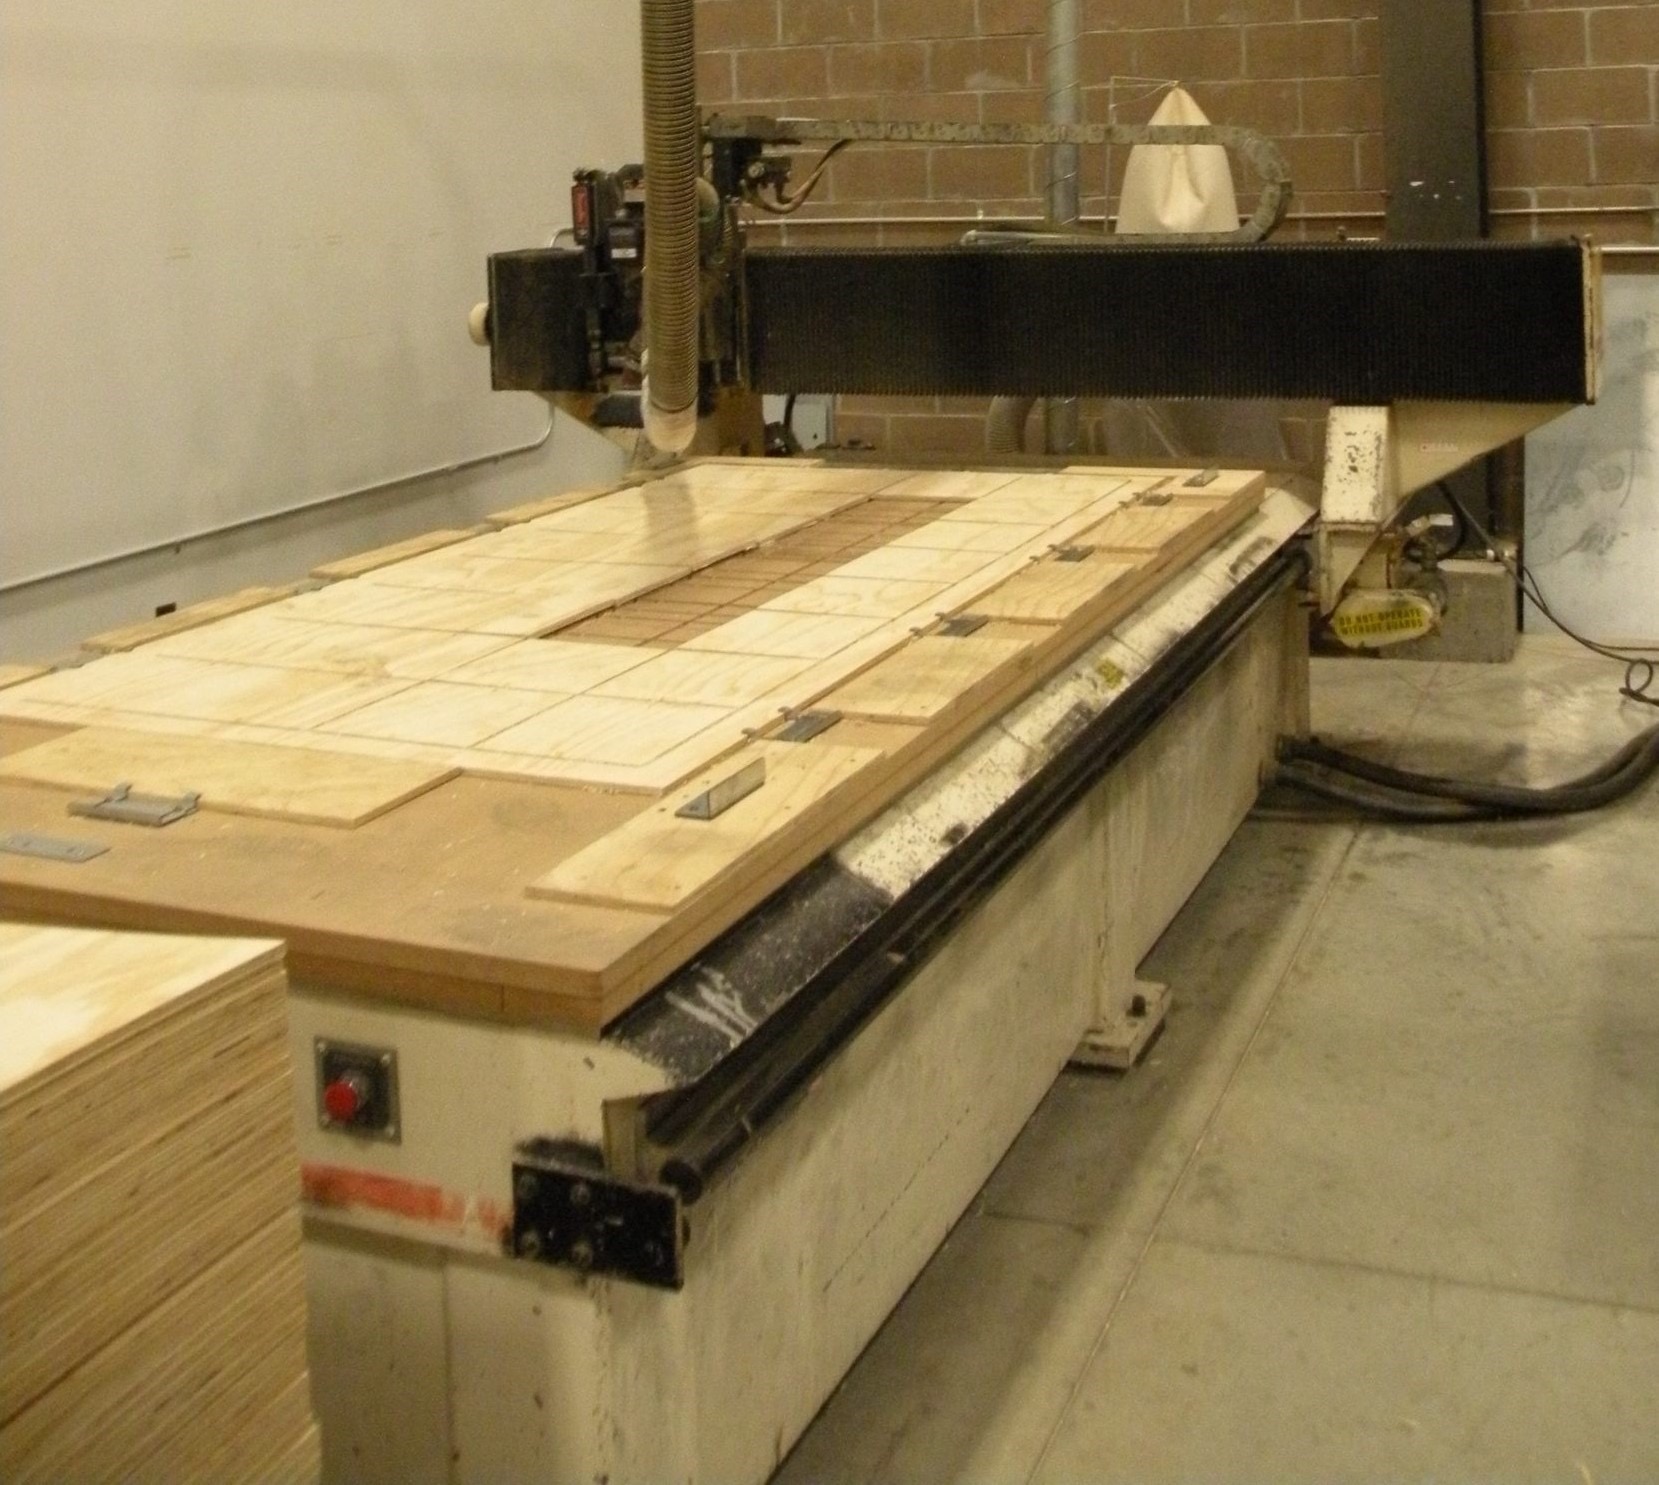 Thermwood Cartesian5 CNC Router 